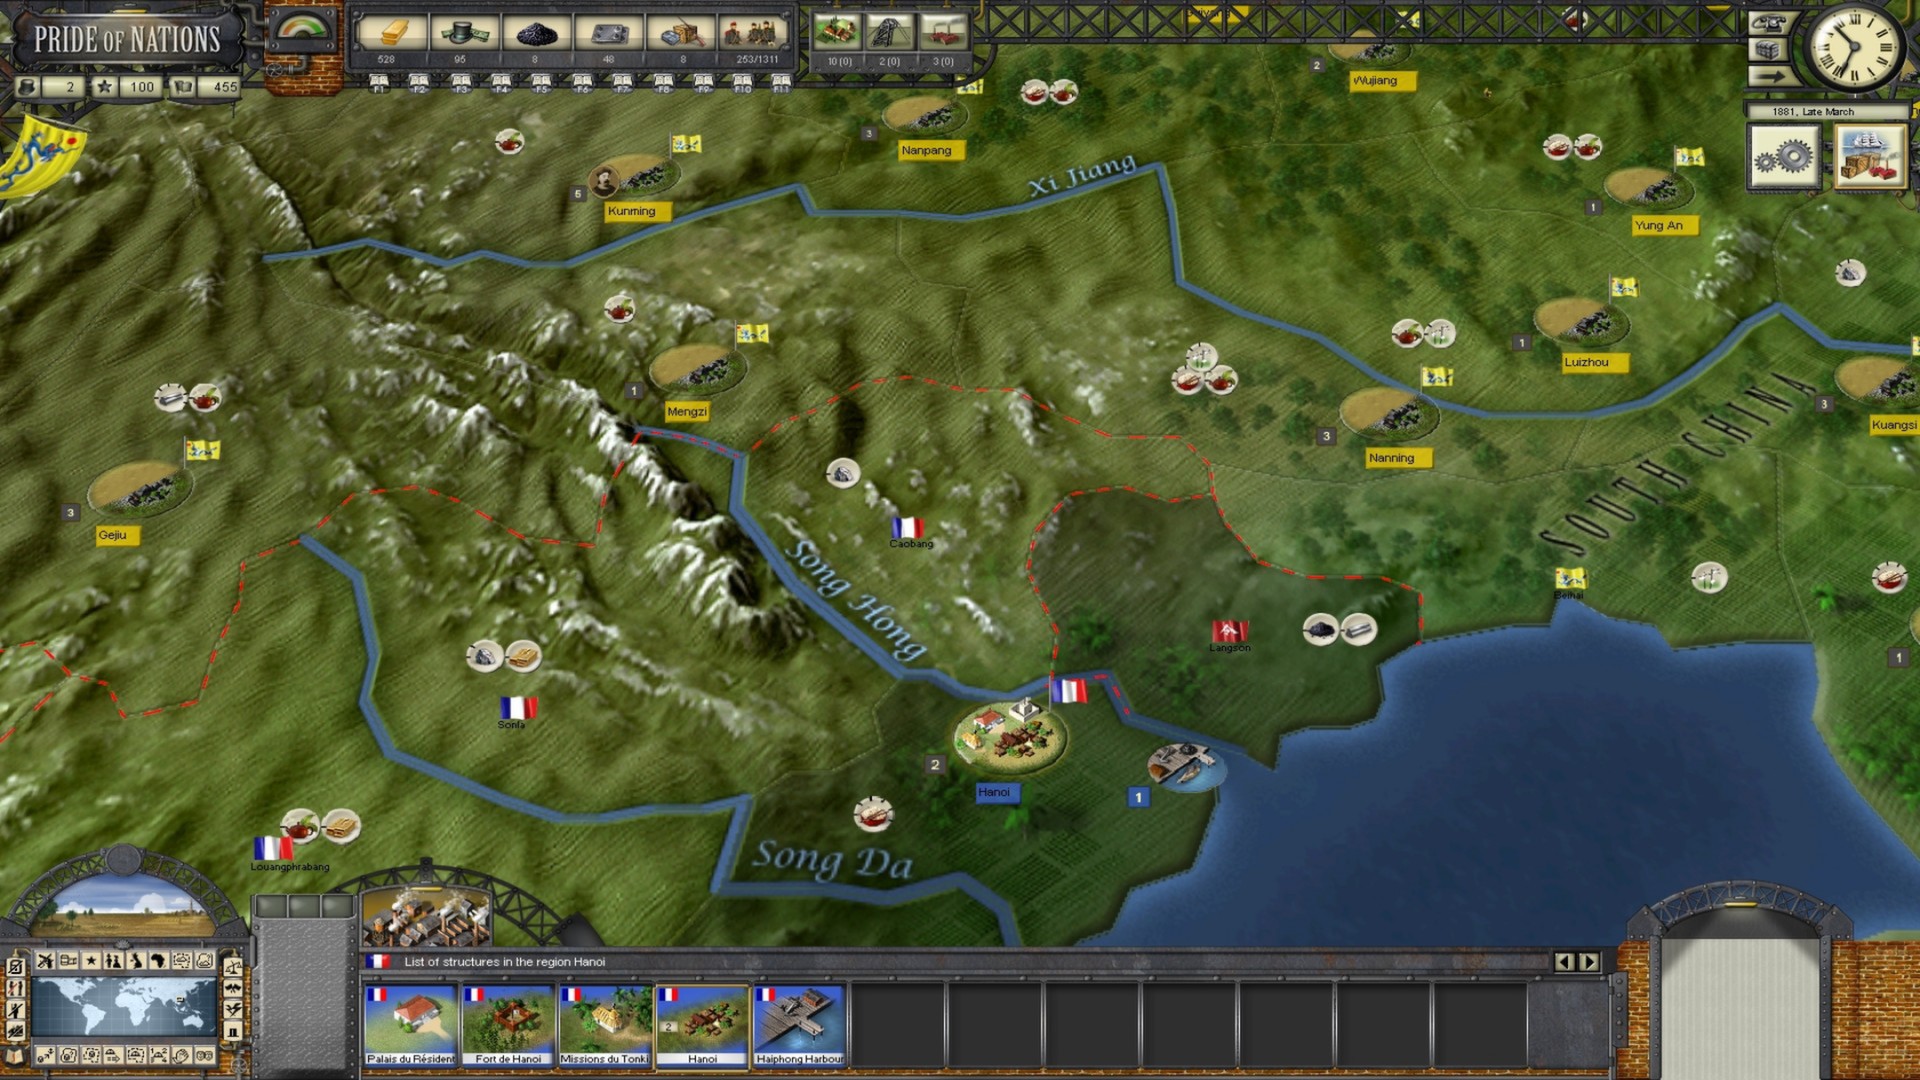 Pride of Nations - The Scramble for Africa DLC Steam CD Key 4.38 $